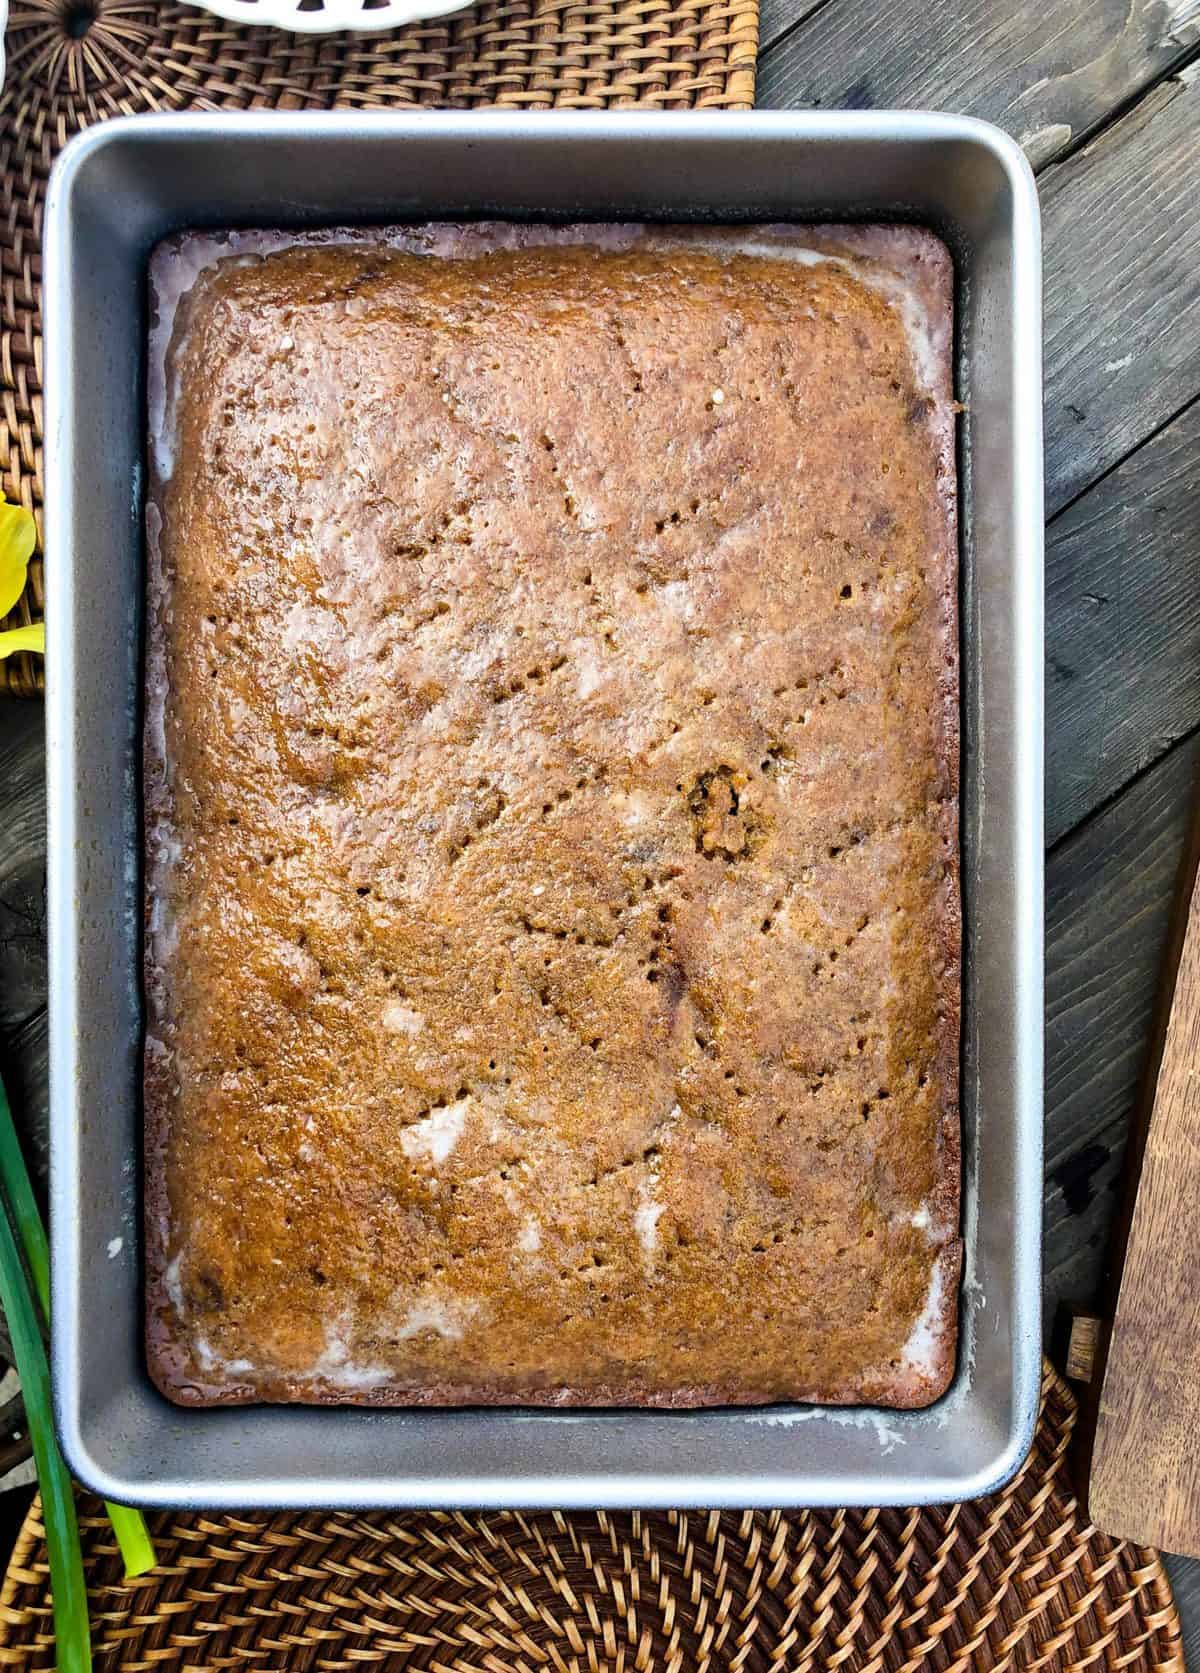 Prune Cake with Pecans